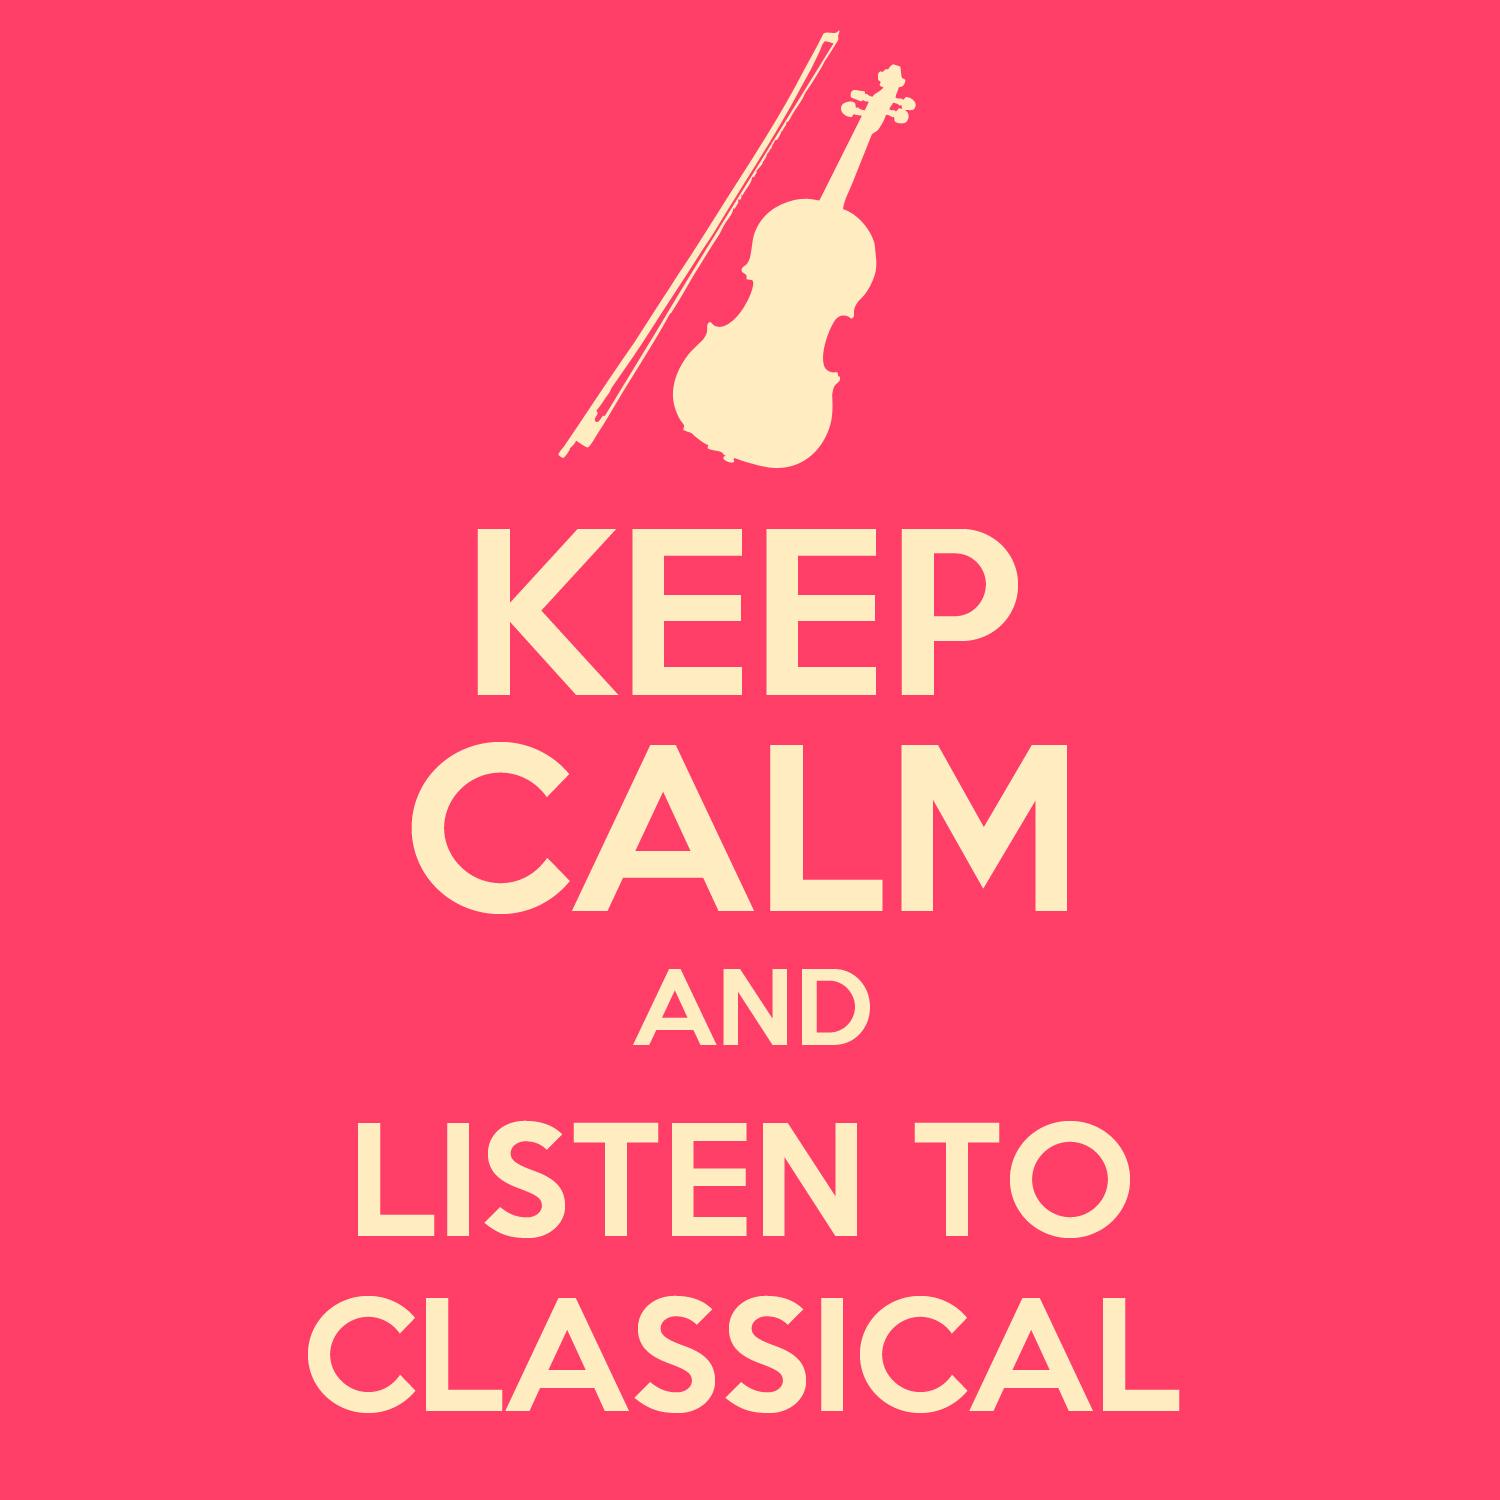 Keep Calm and Listen to Classical